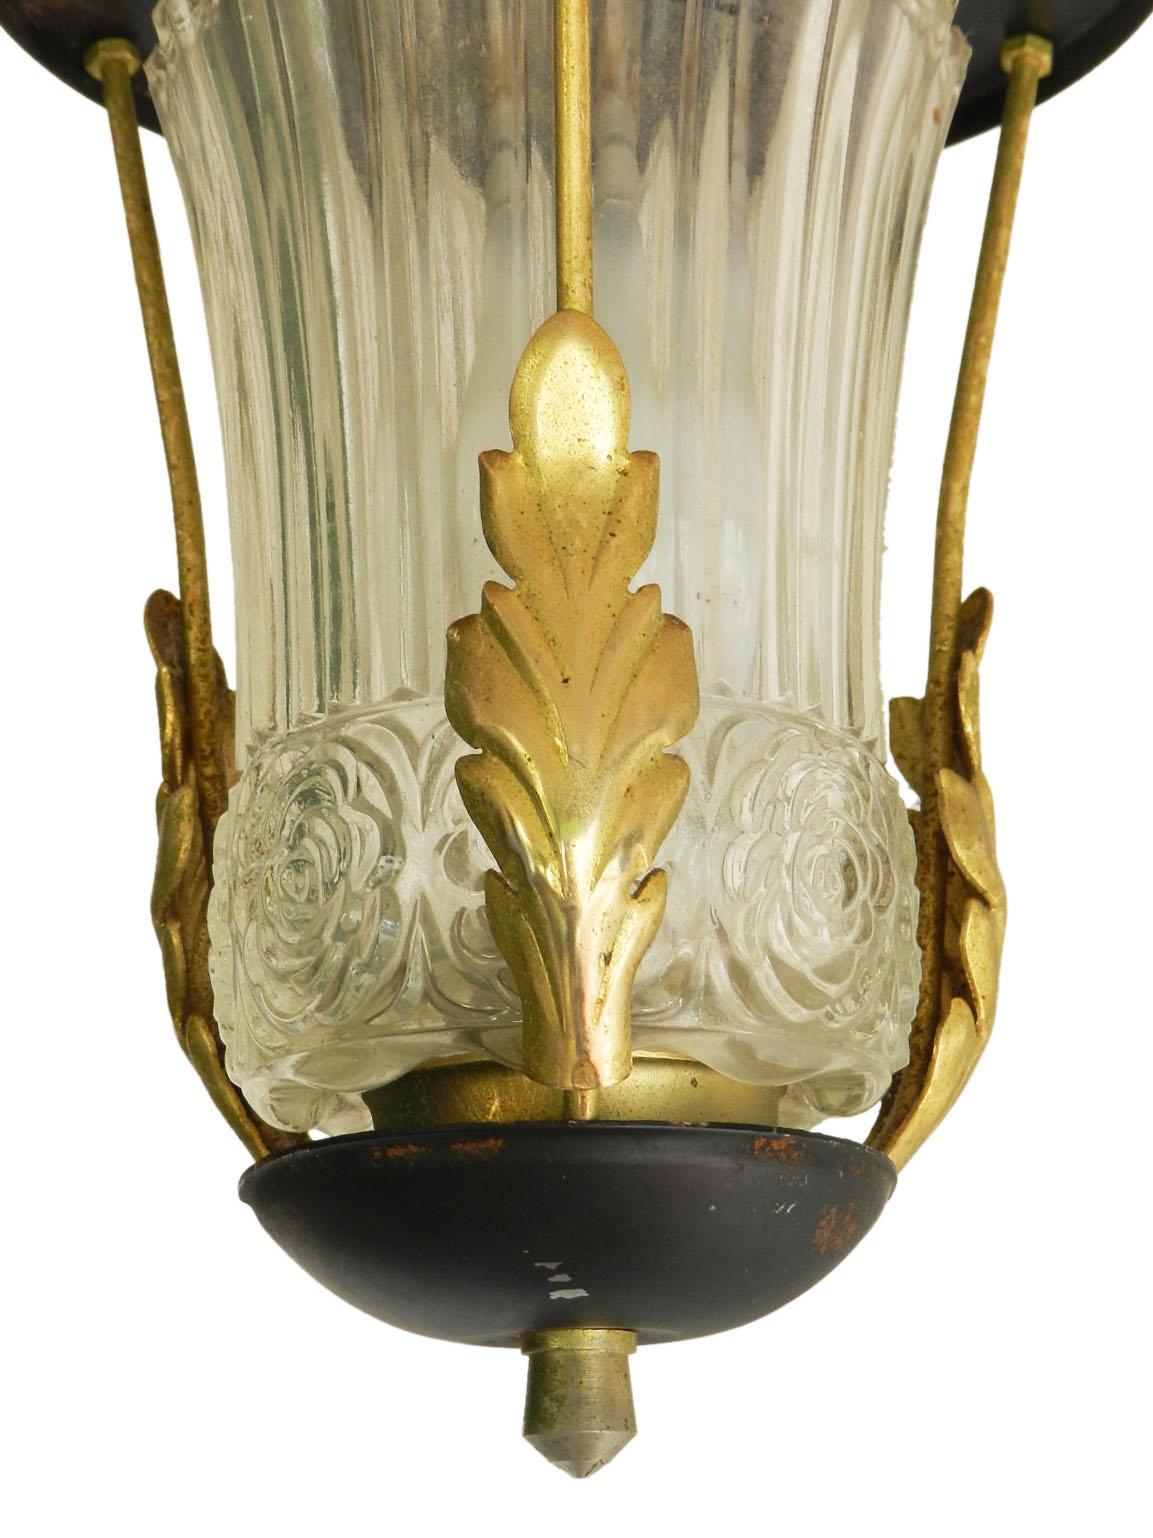 Pendant light attributed to Poillerat
Midcentury
Unusual glass and metal ceiling light
Measurements given are for the lantern itself
The drop can be adjusted please ask for length of drop you require
In good vintage condition with signs of age